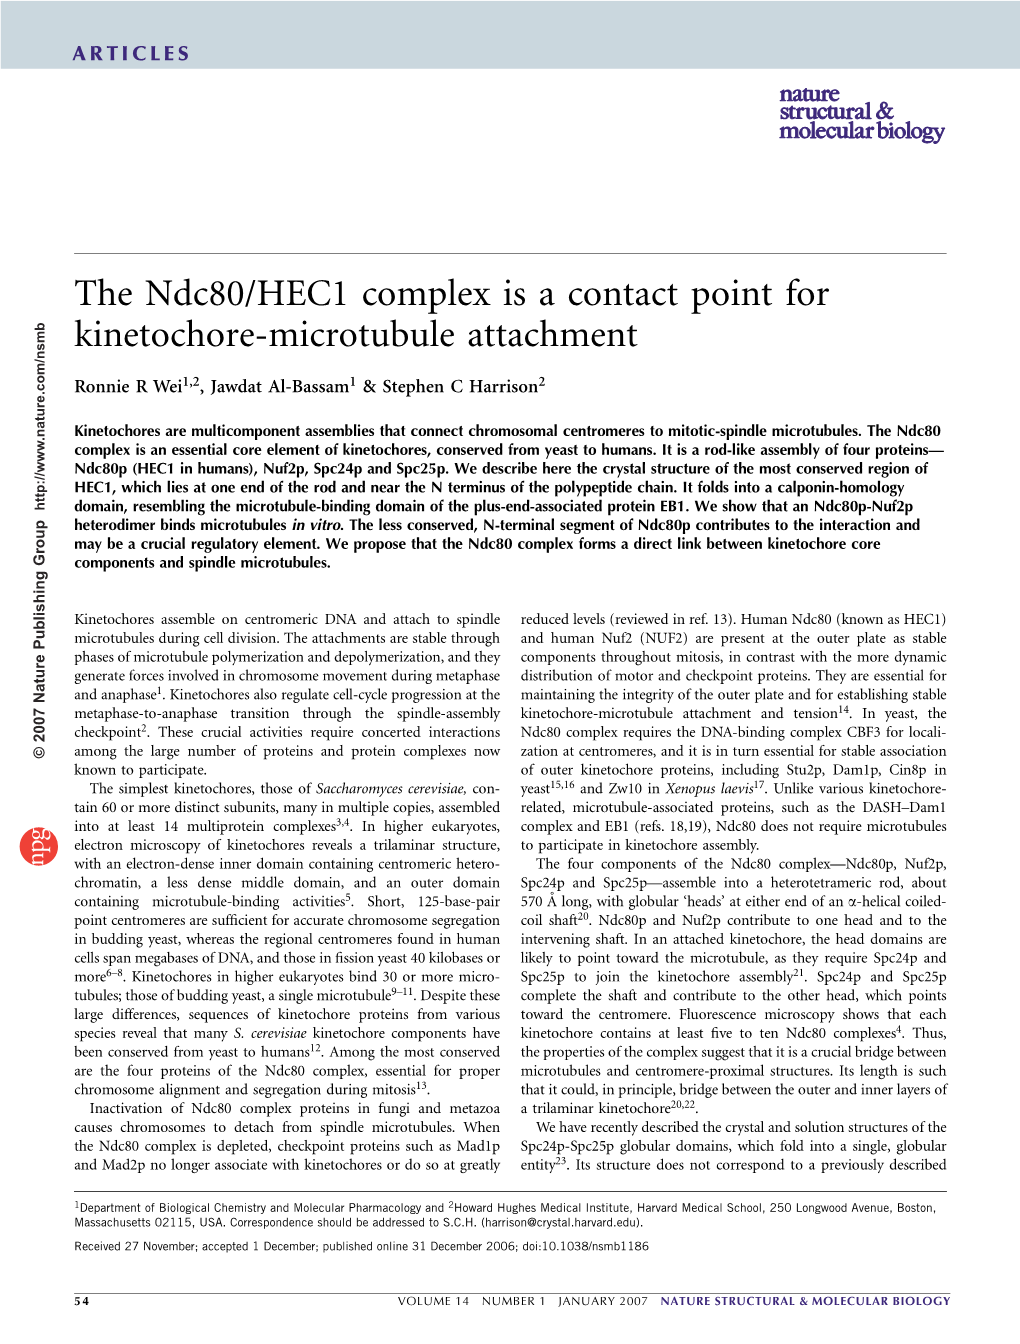 The Ndc80/HEC1 Complex Is a Contact Point for Kinetochore-Microtubule Attachment